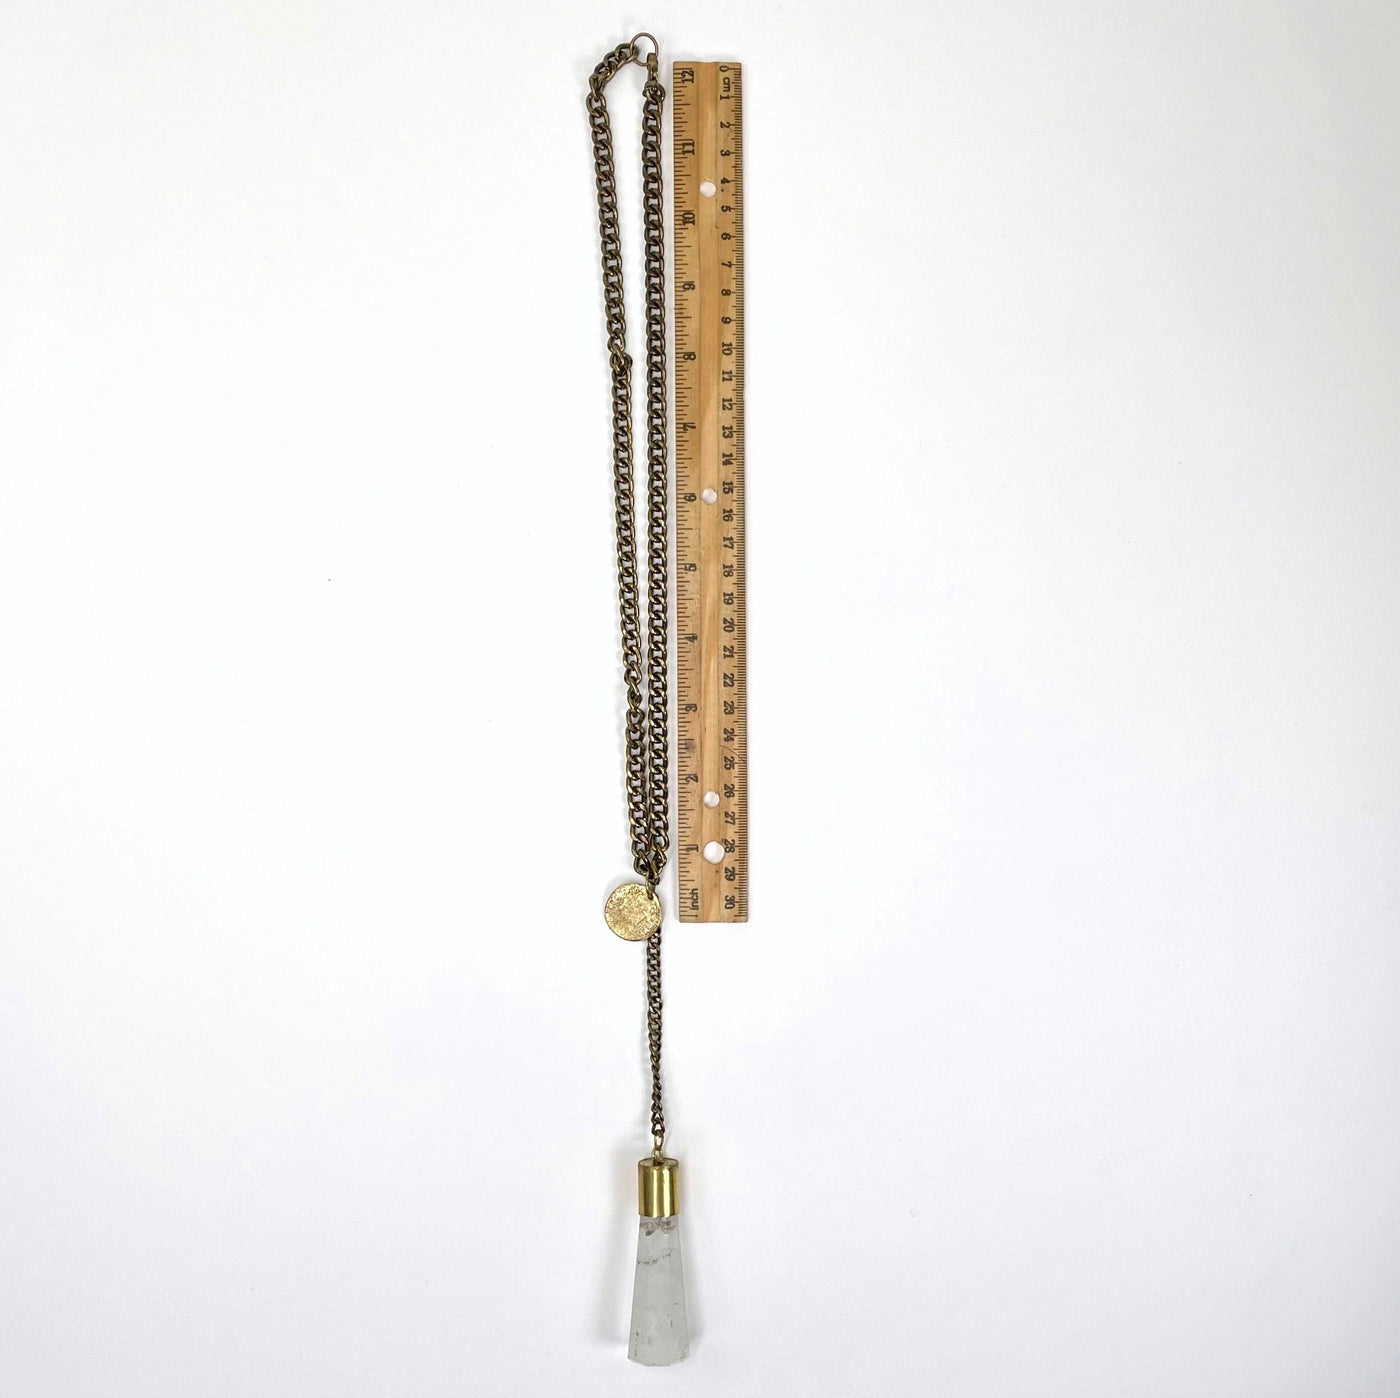 full necklace length on white background with ruler for length reference